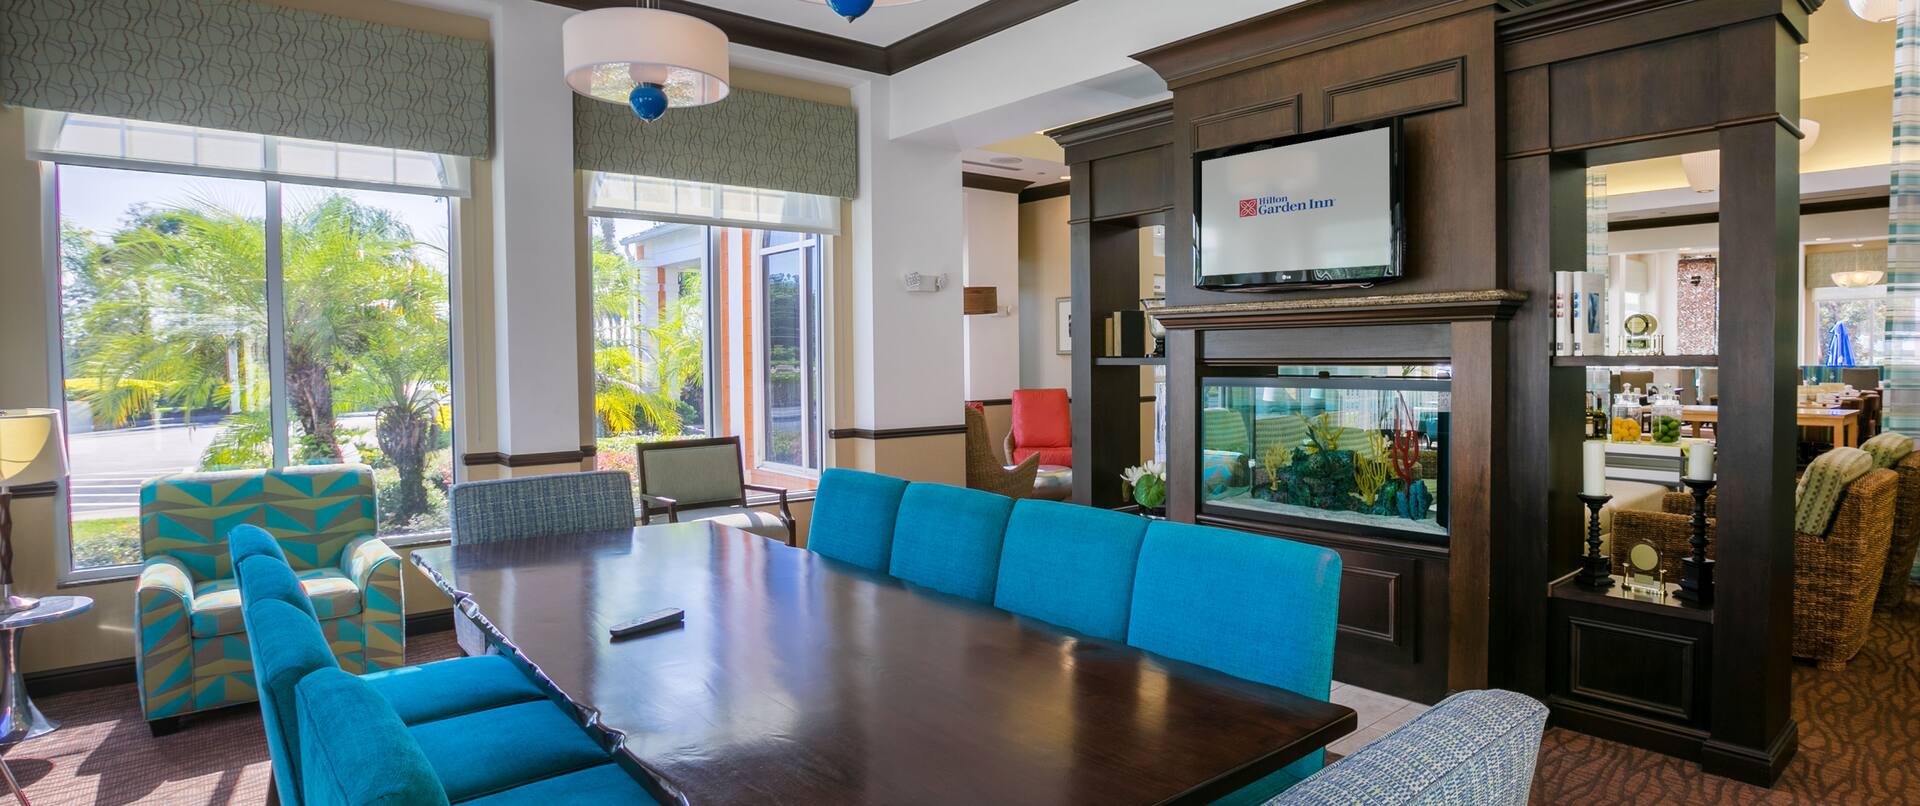 Lobby Seating Area with Chairs, Table, Fish Tank and Wall Mounted HDTV